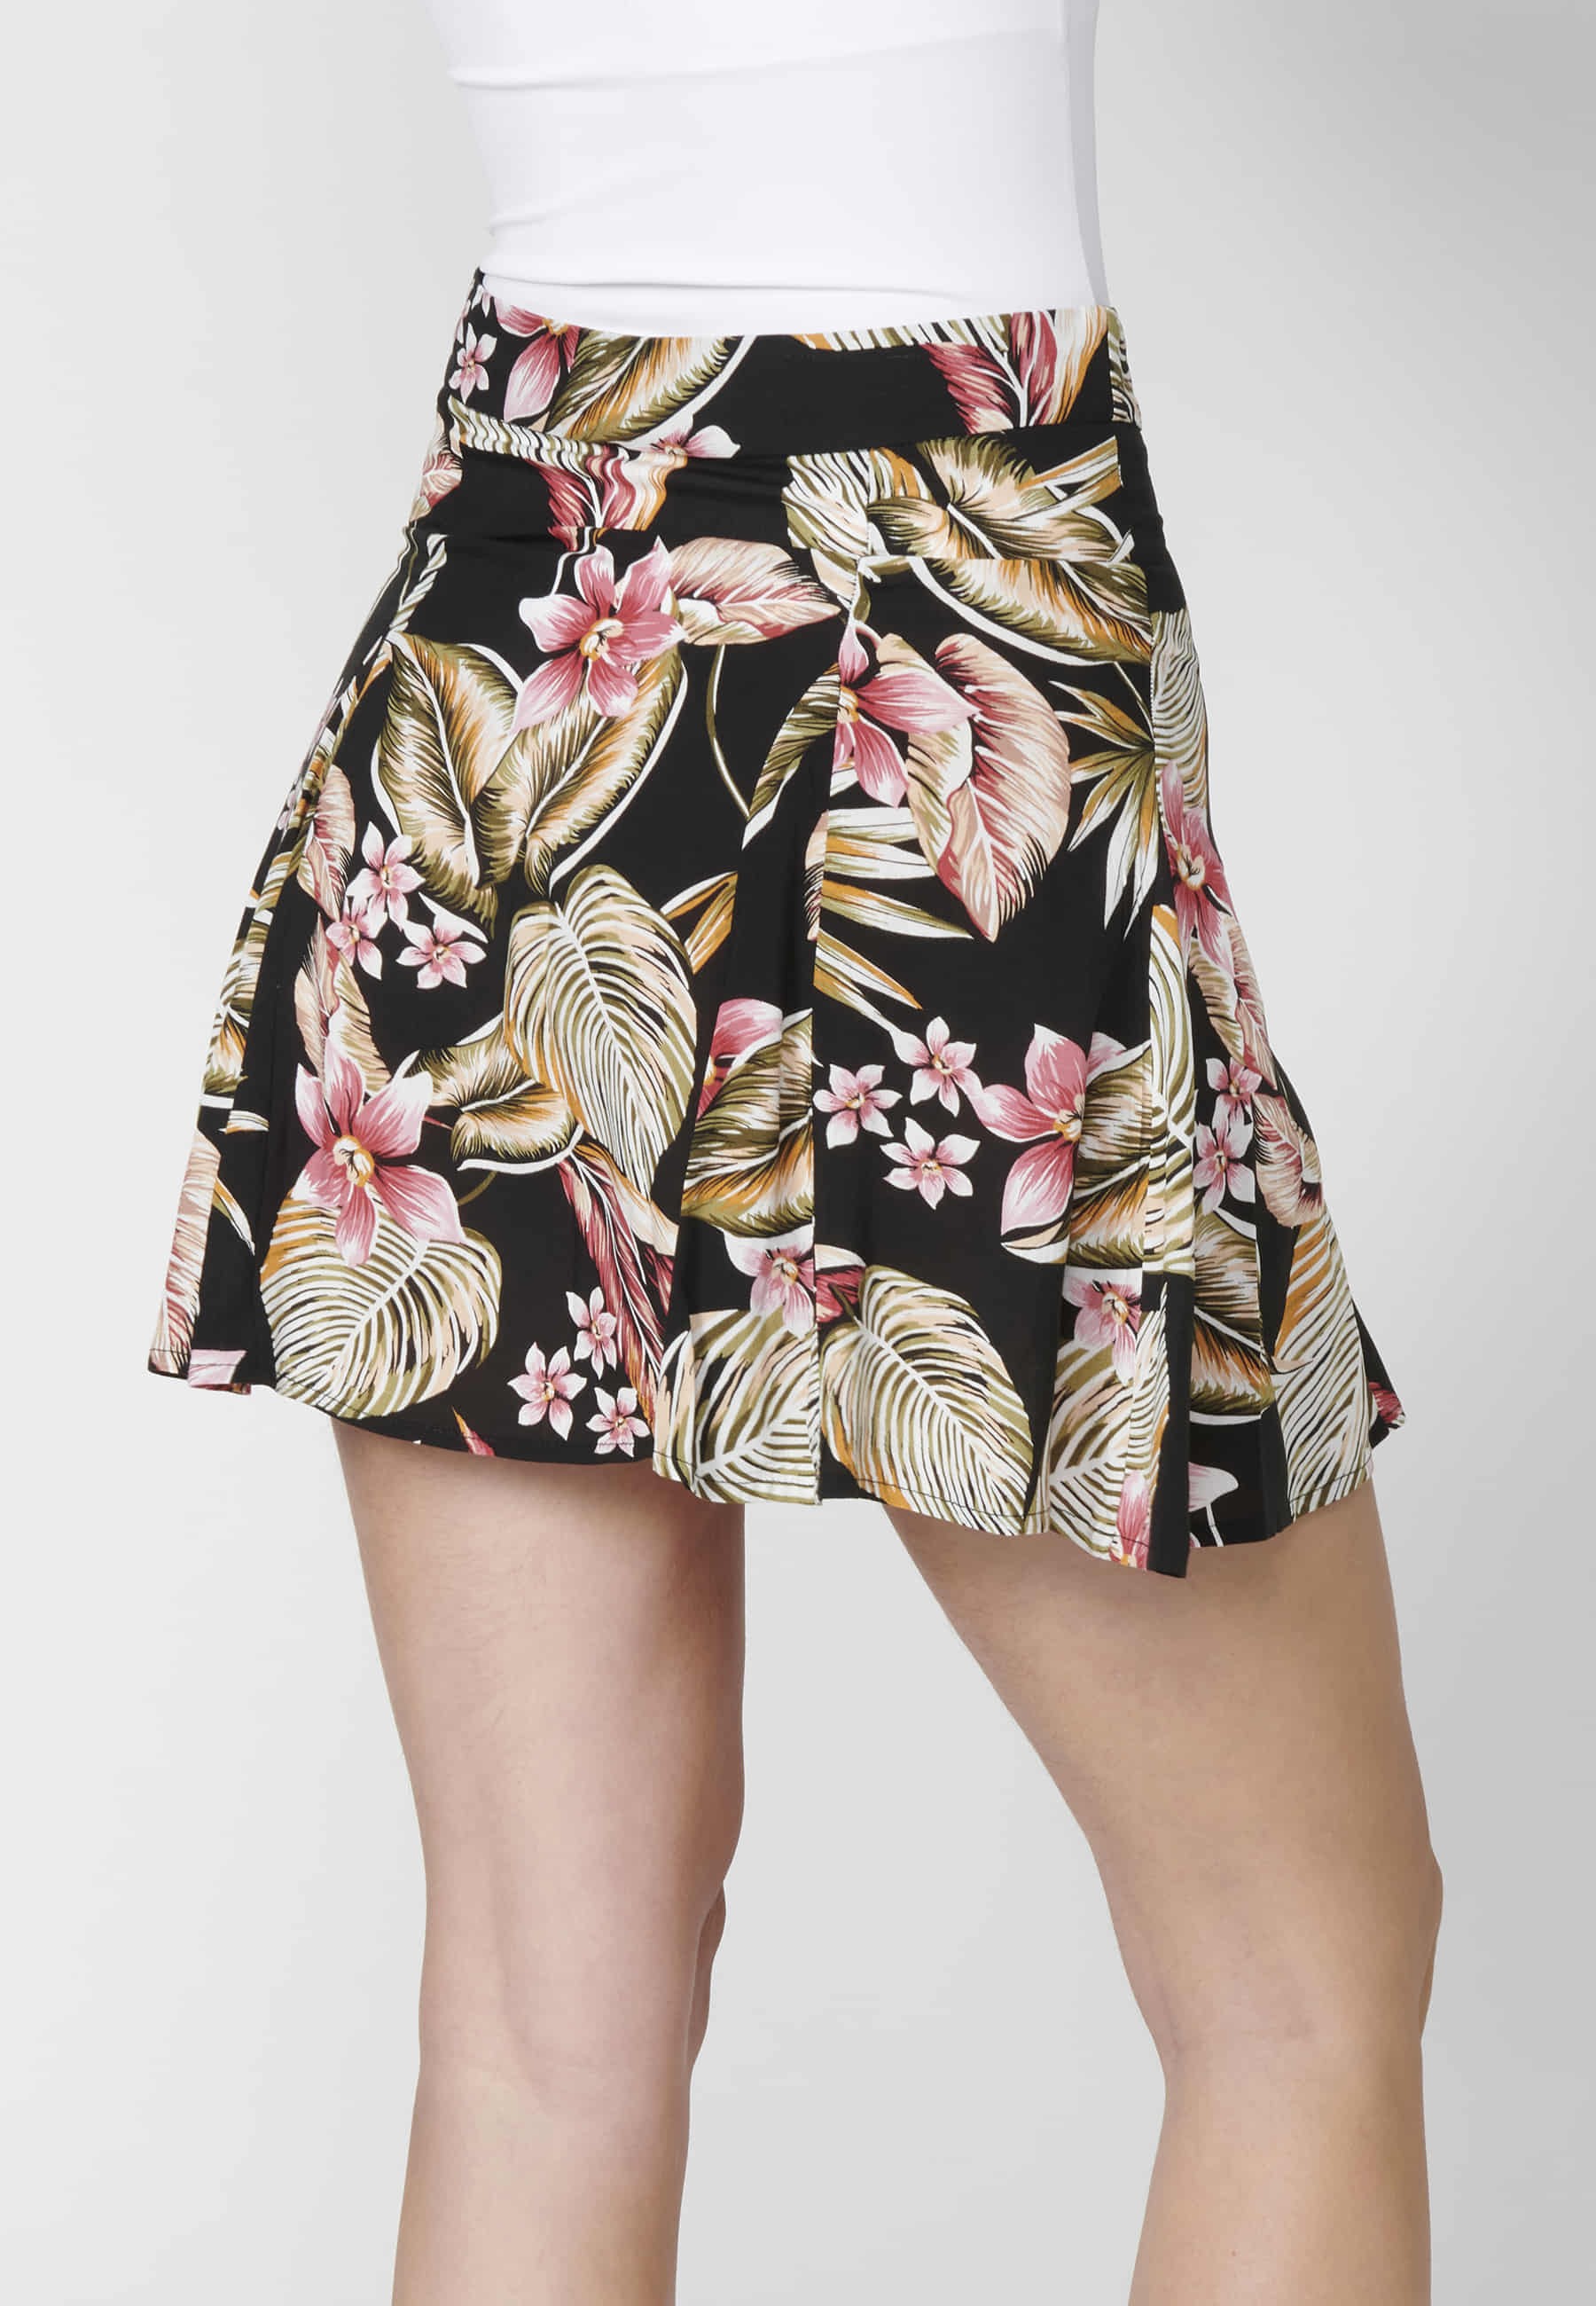 Short skirt with black floral print for Woman